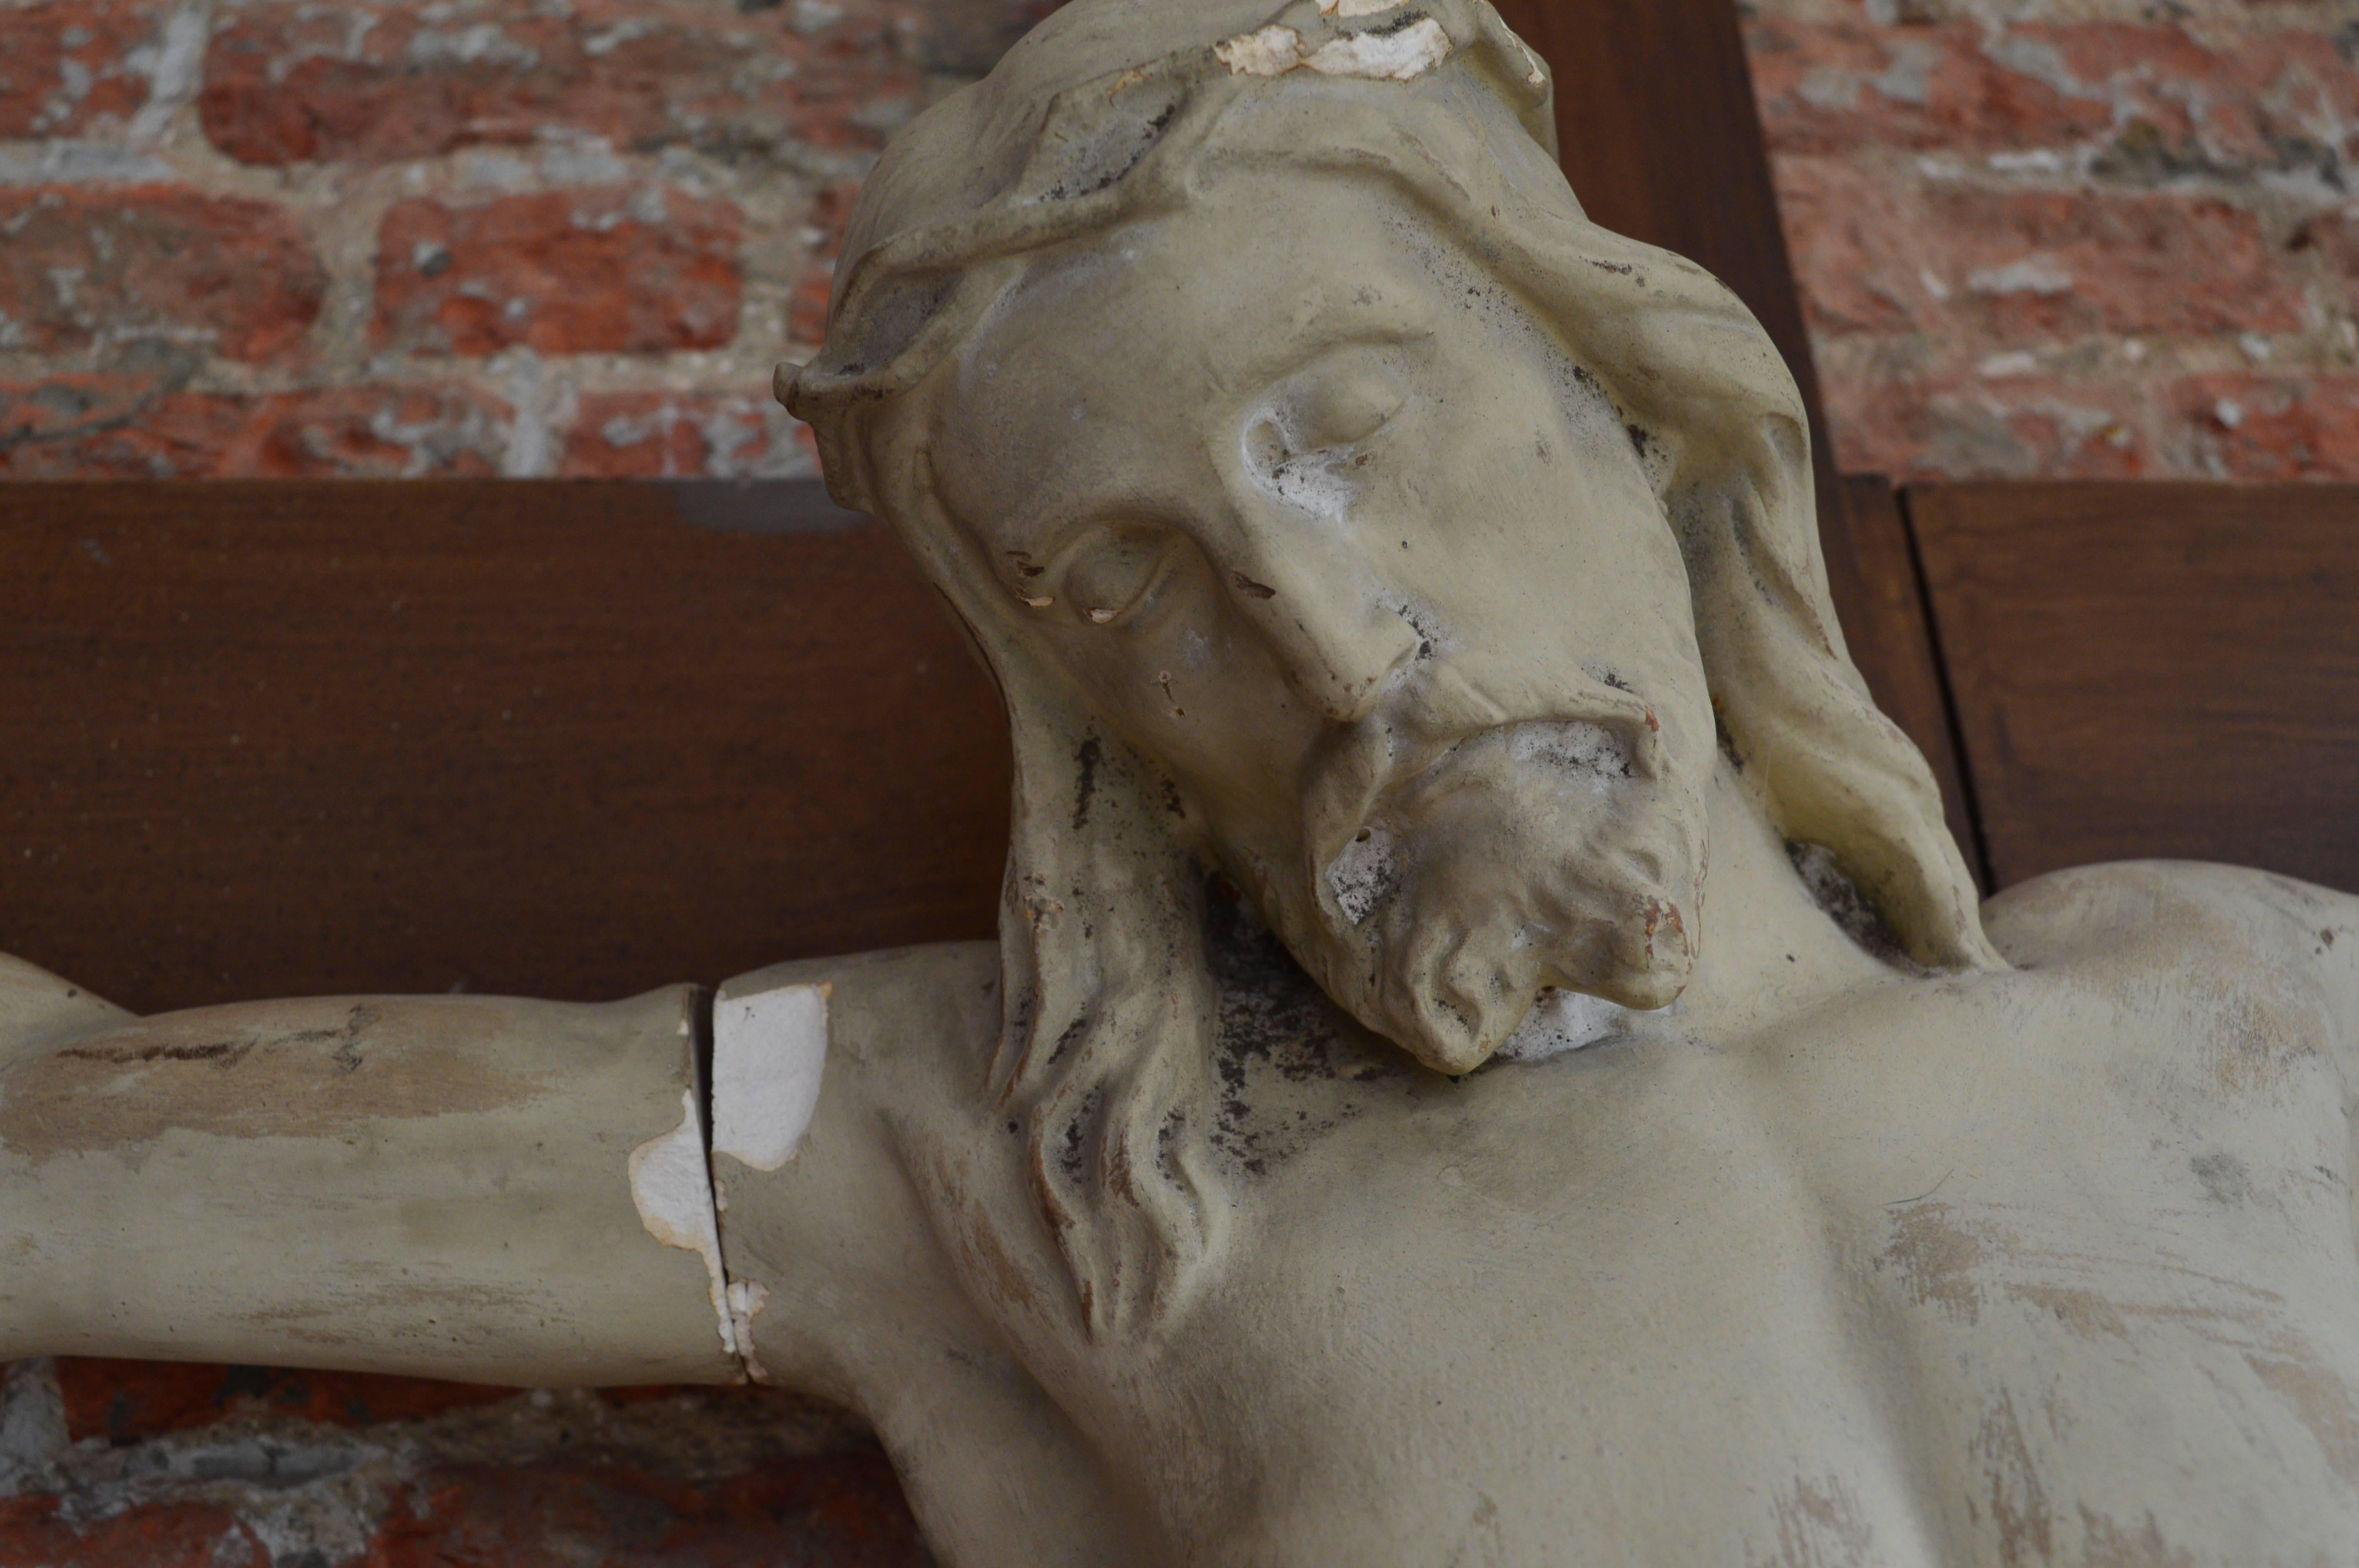 Belgian Over 6' Tall 19th Century Flemish Crucifix  For Sale